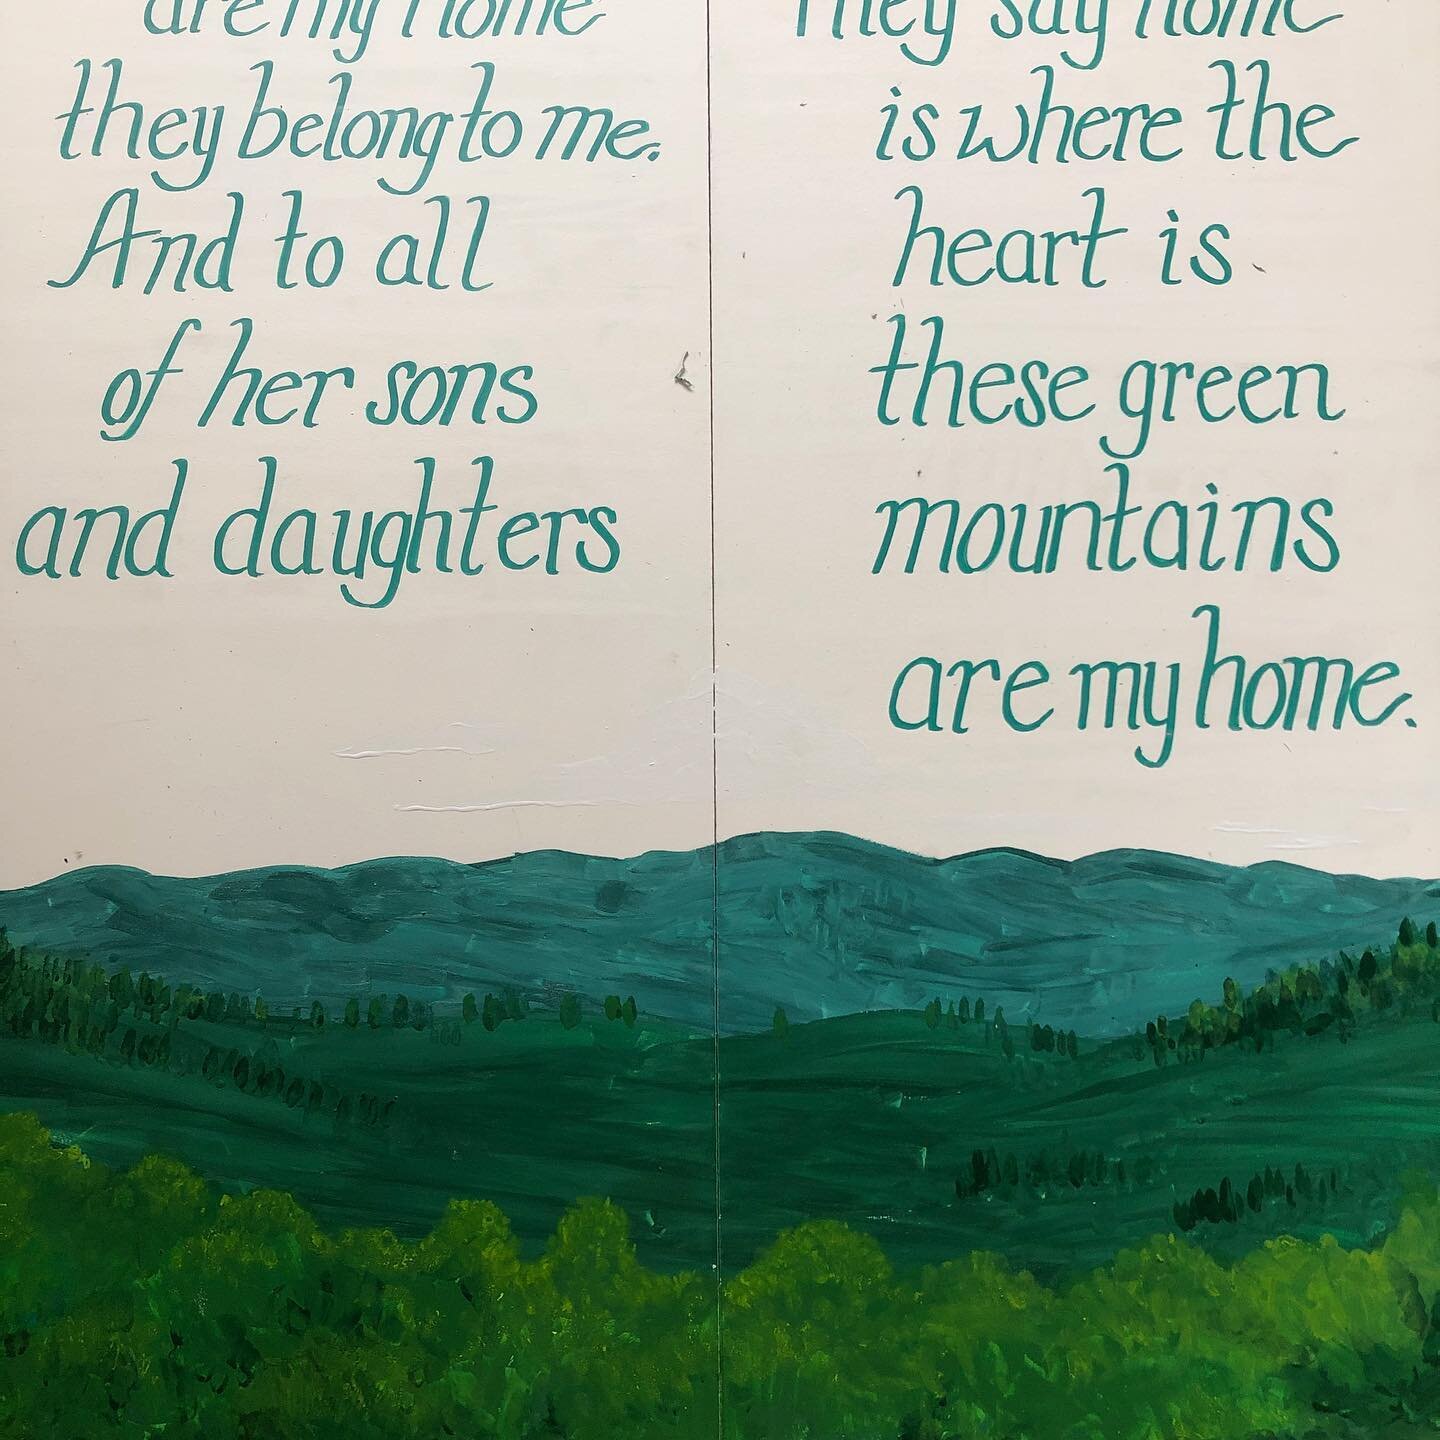 🎶These green hills and silver waters&hellip;🎶❤️🍃🎨 #vermont #newengland #landscape #rustoleum #plumchester #painting #illustration #lettering #calligraphy #mountains